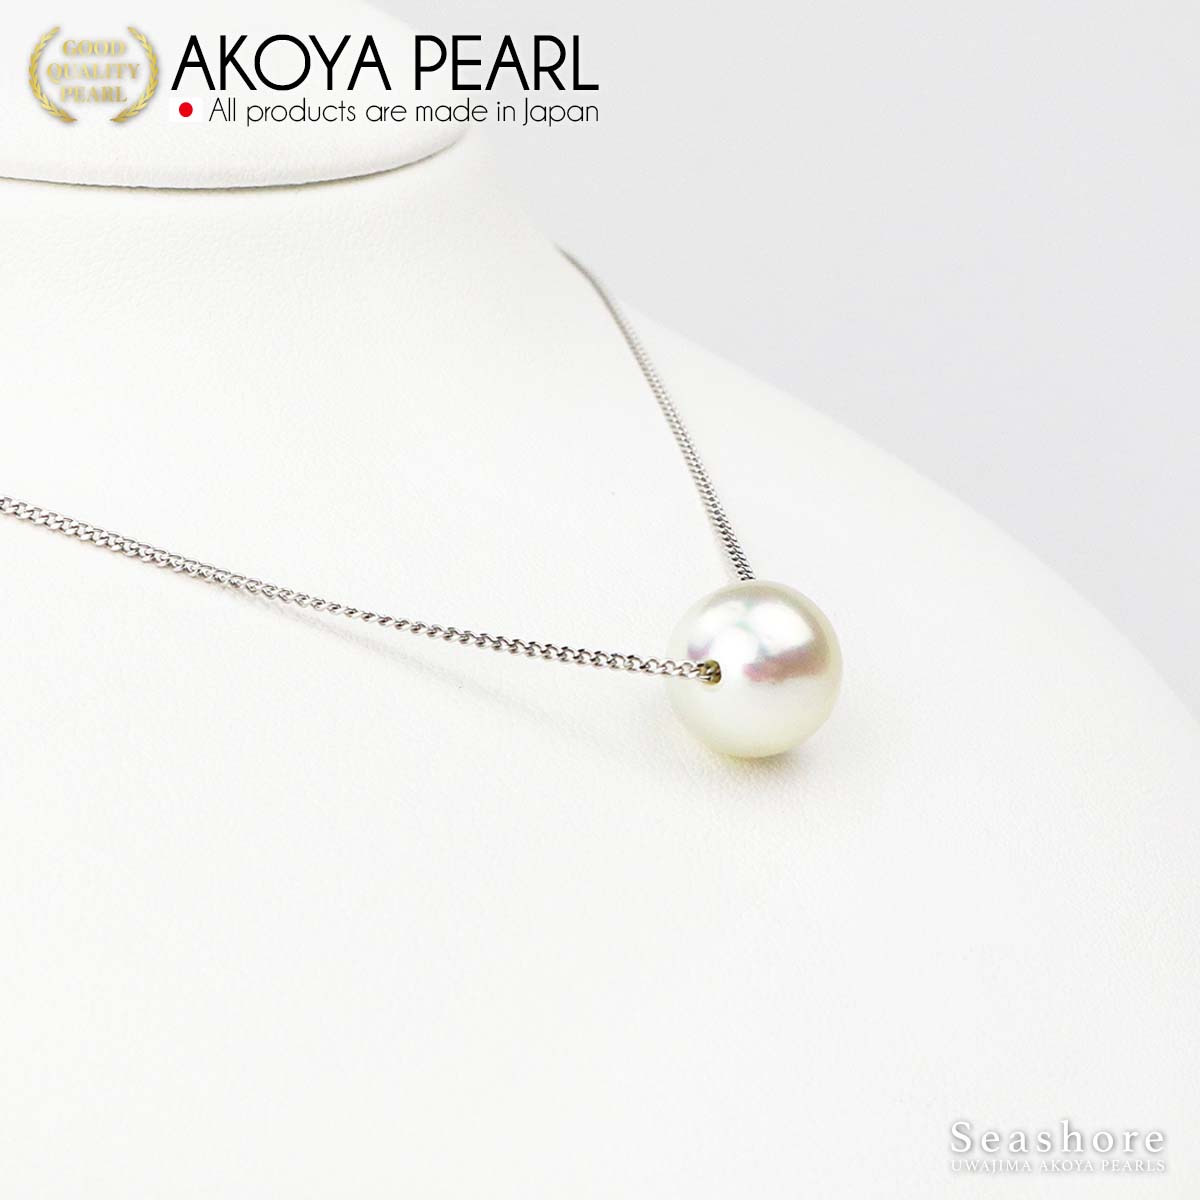 [Natural White] Uncolored Large Akoya Pearl Through Necklace [10-10.5mm] SV925 50cm with Slide Adjuster Chain Semi-Round with Gray Case for Storage (3853)